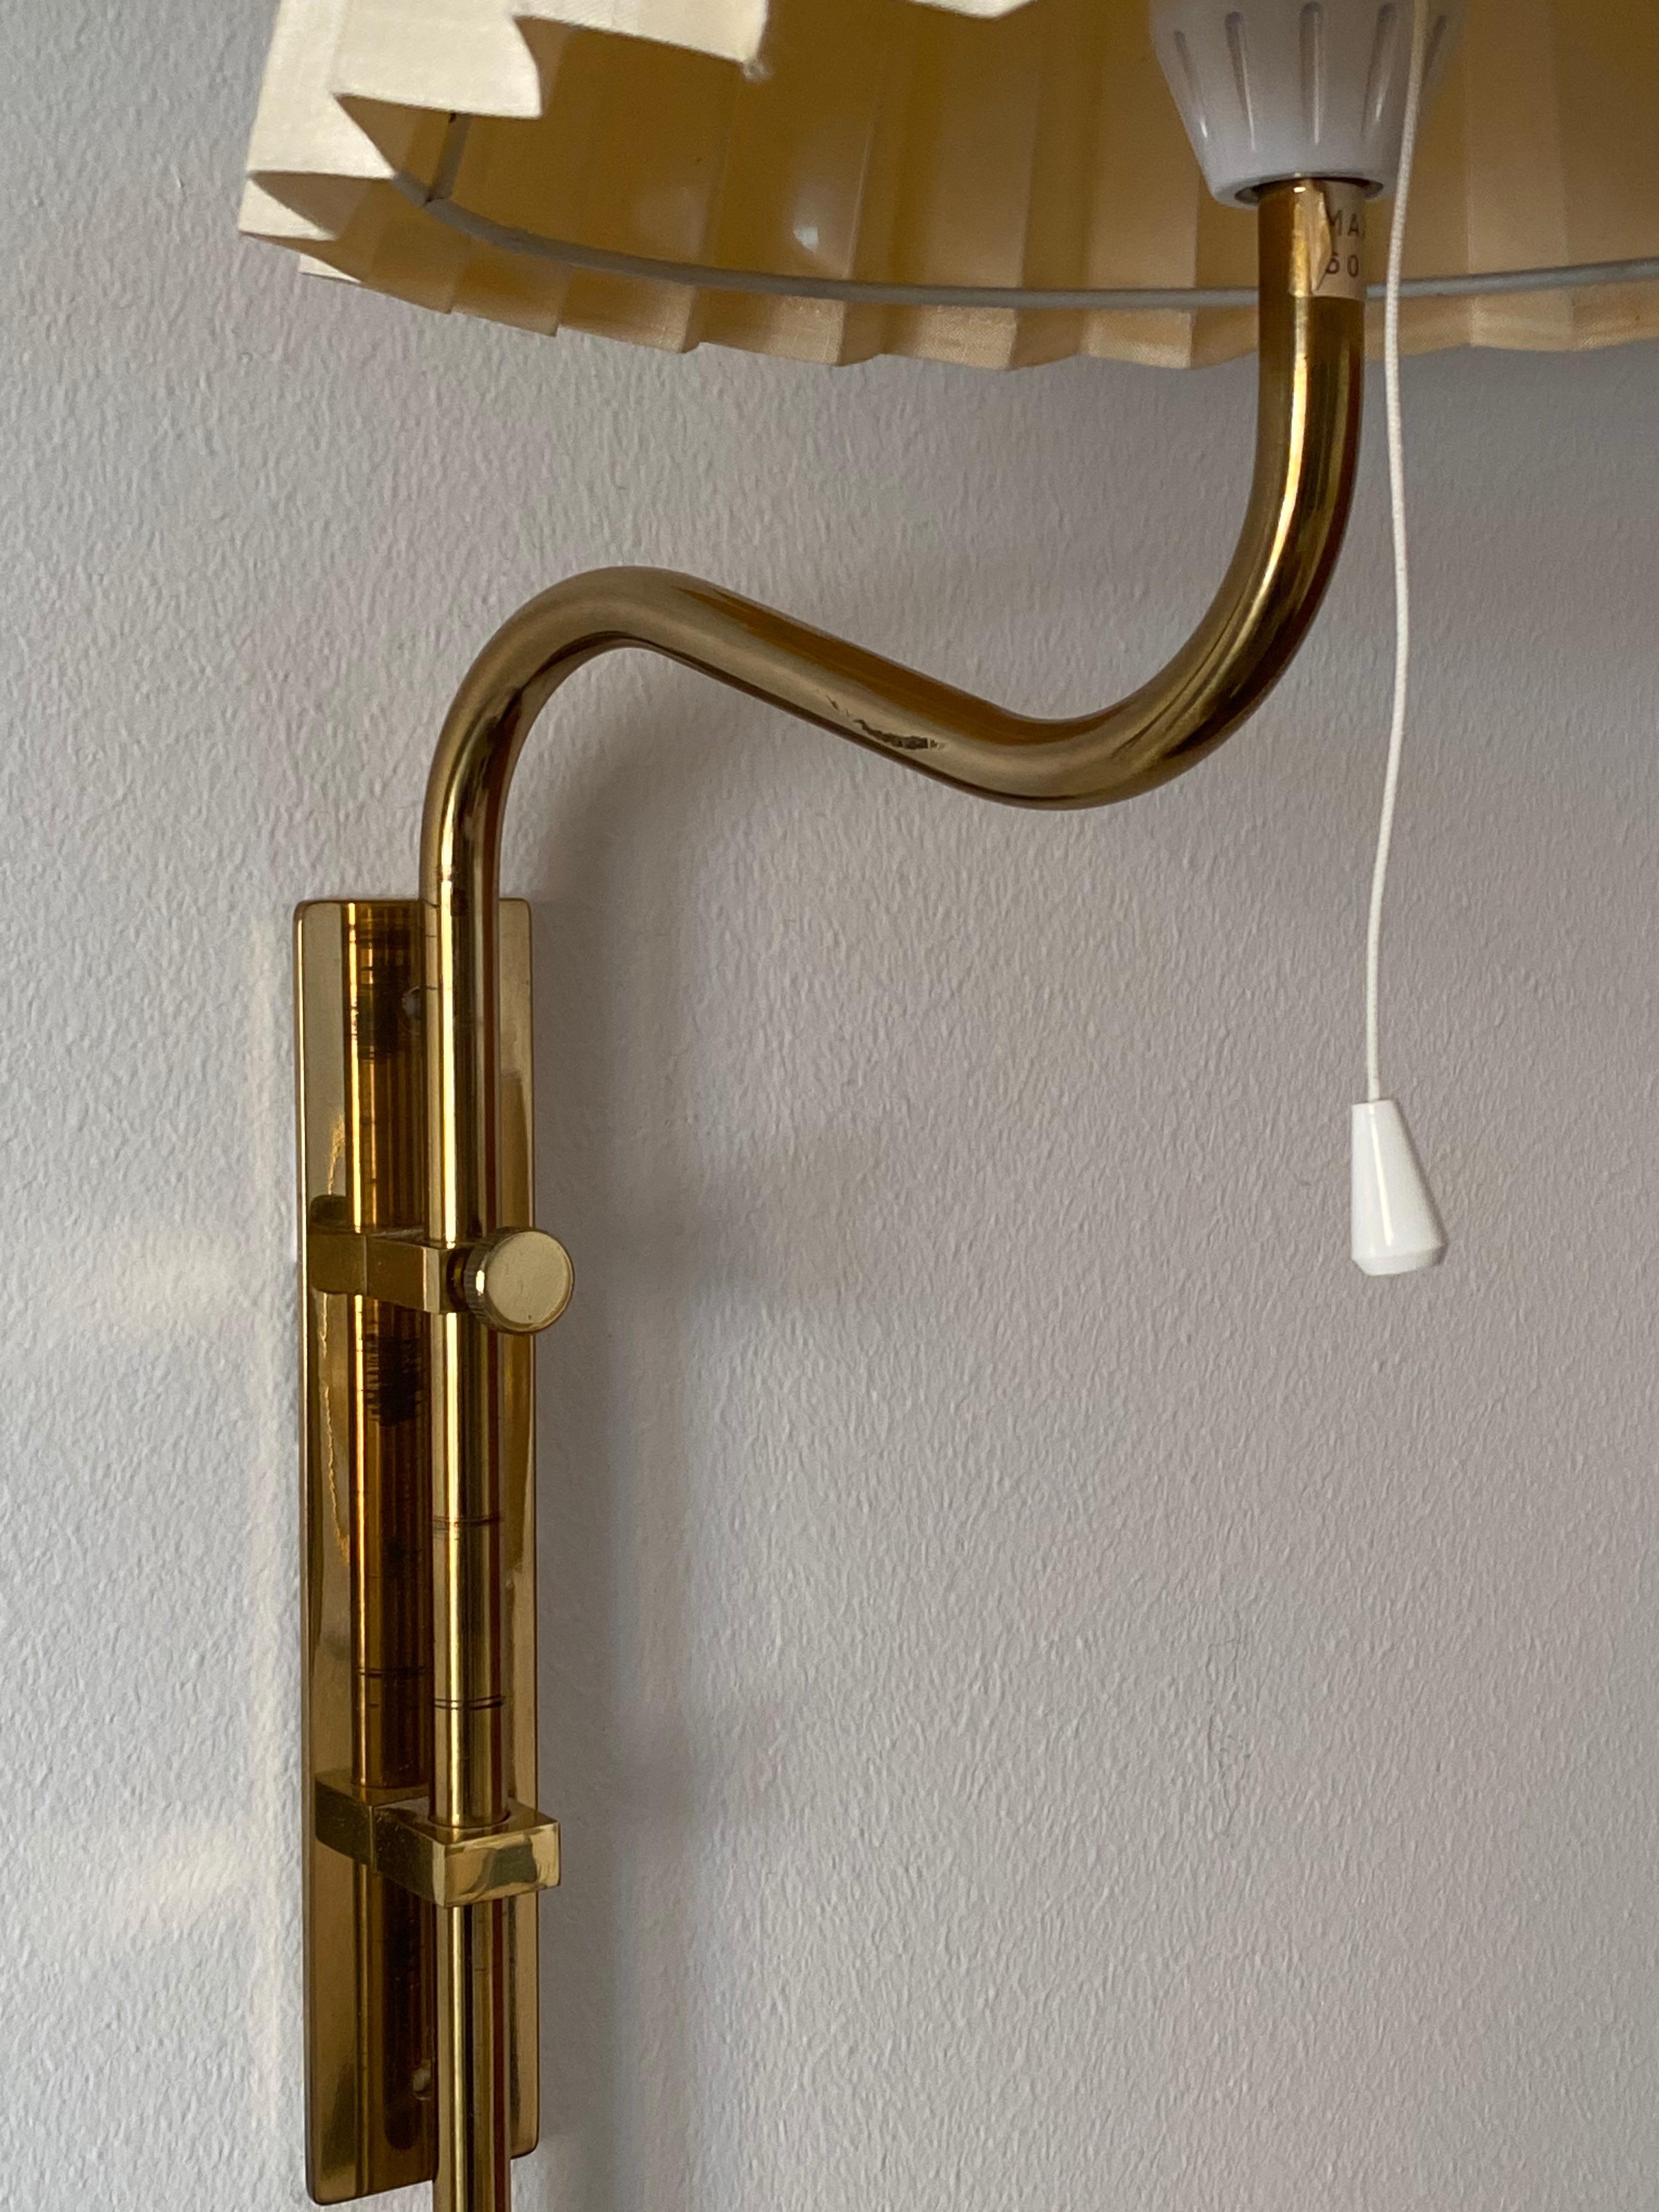 A pair of adjustable wall lights / wall sconces. Designed and produced by Bergboms, Sweden, 1960s. Labeled.

Features its original lampshades.

Other designers of the period include Paavo Tynell, Hans Bergström, Josef Frank, and Kaare Klint.